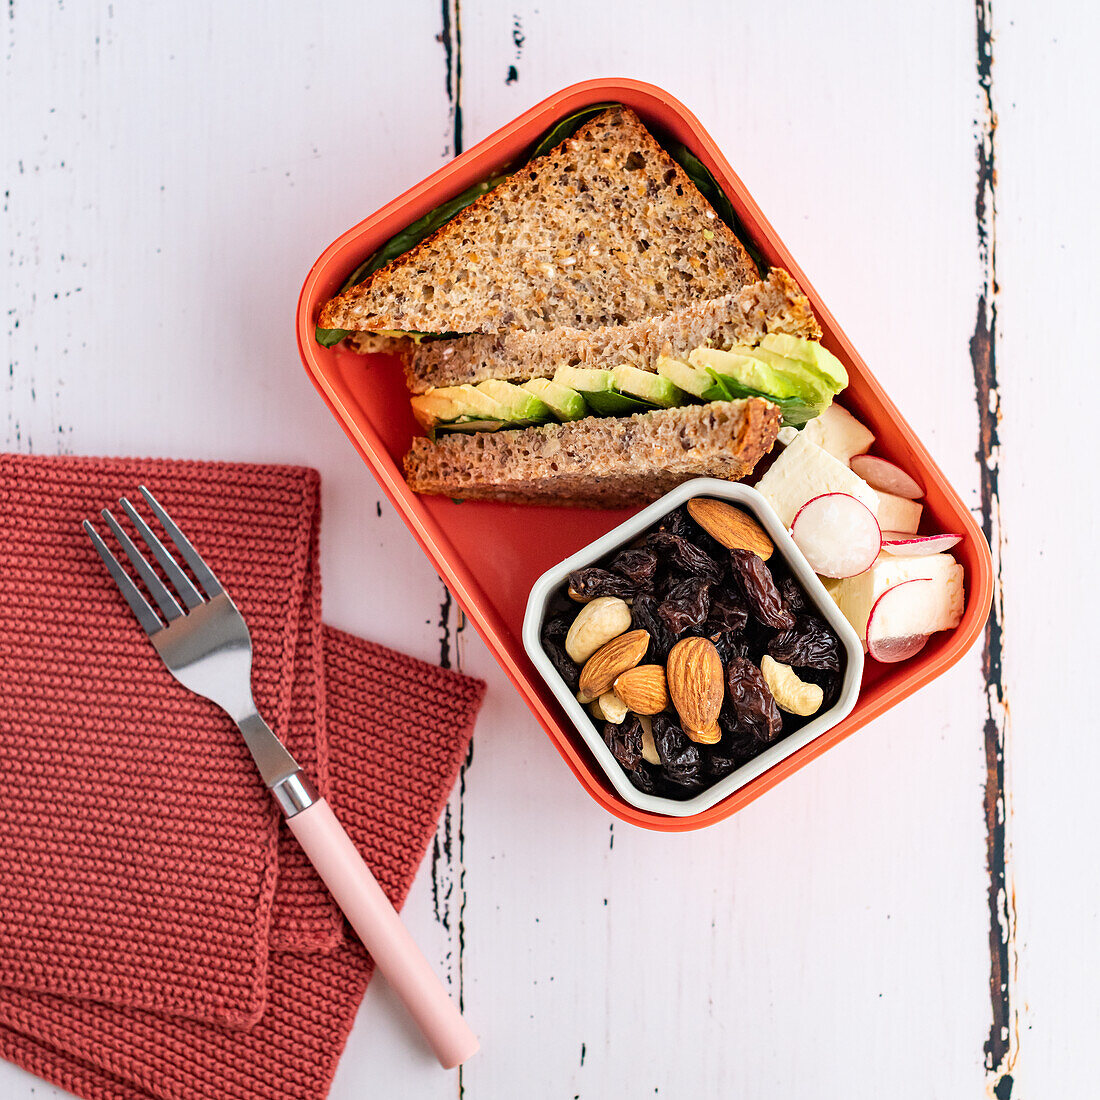 Sandwich, radish and trail mix in lunch box